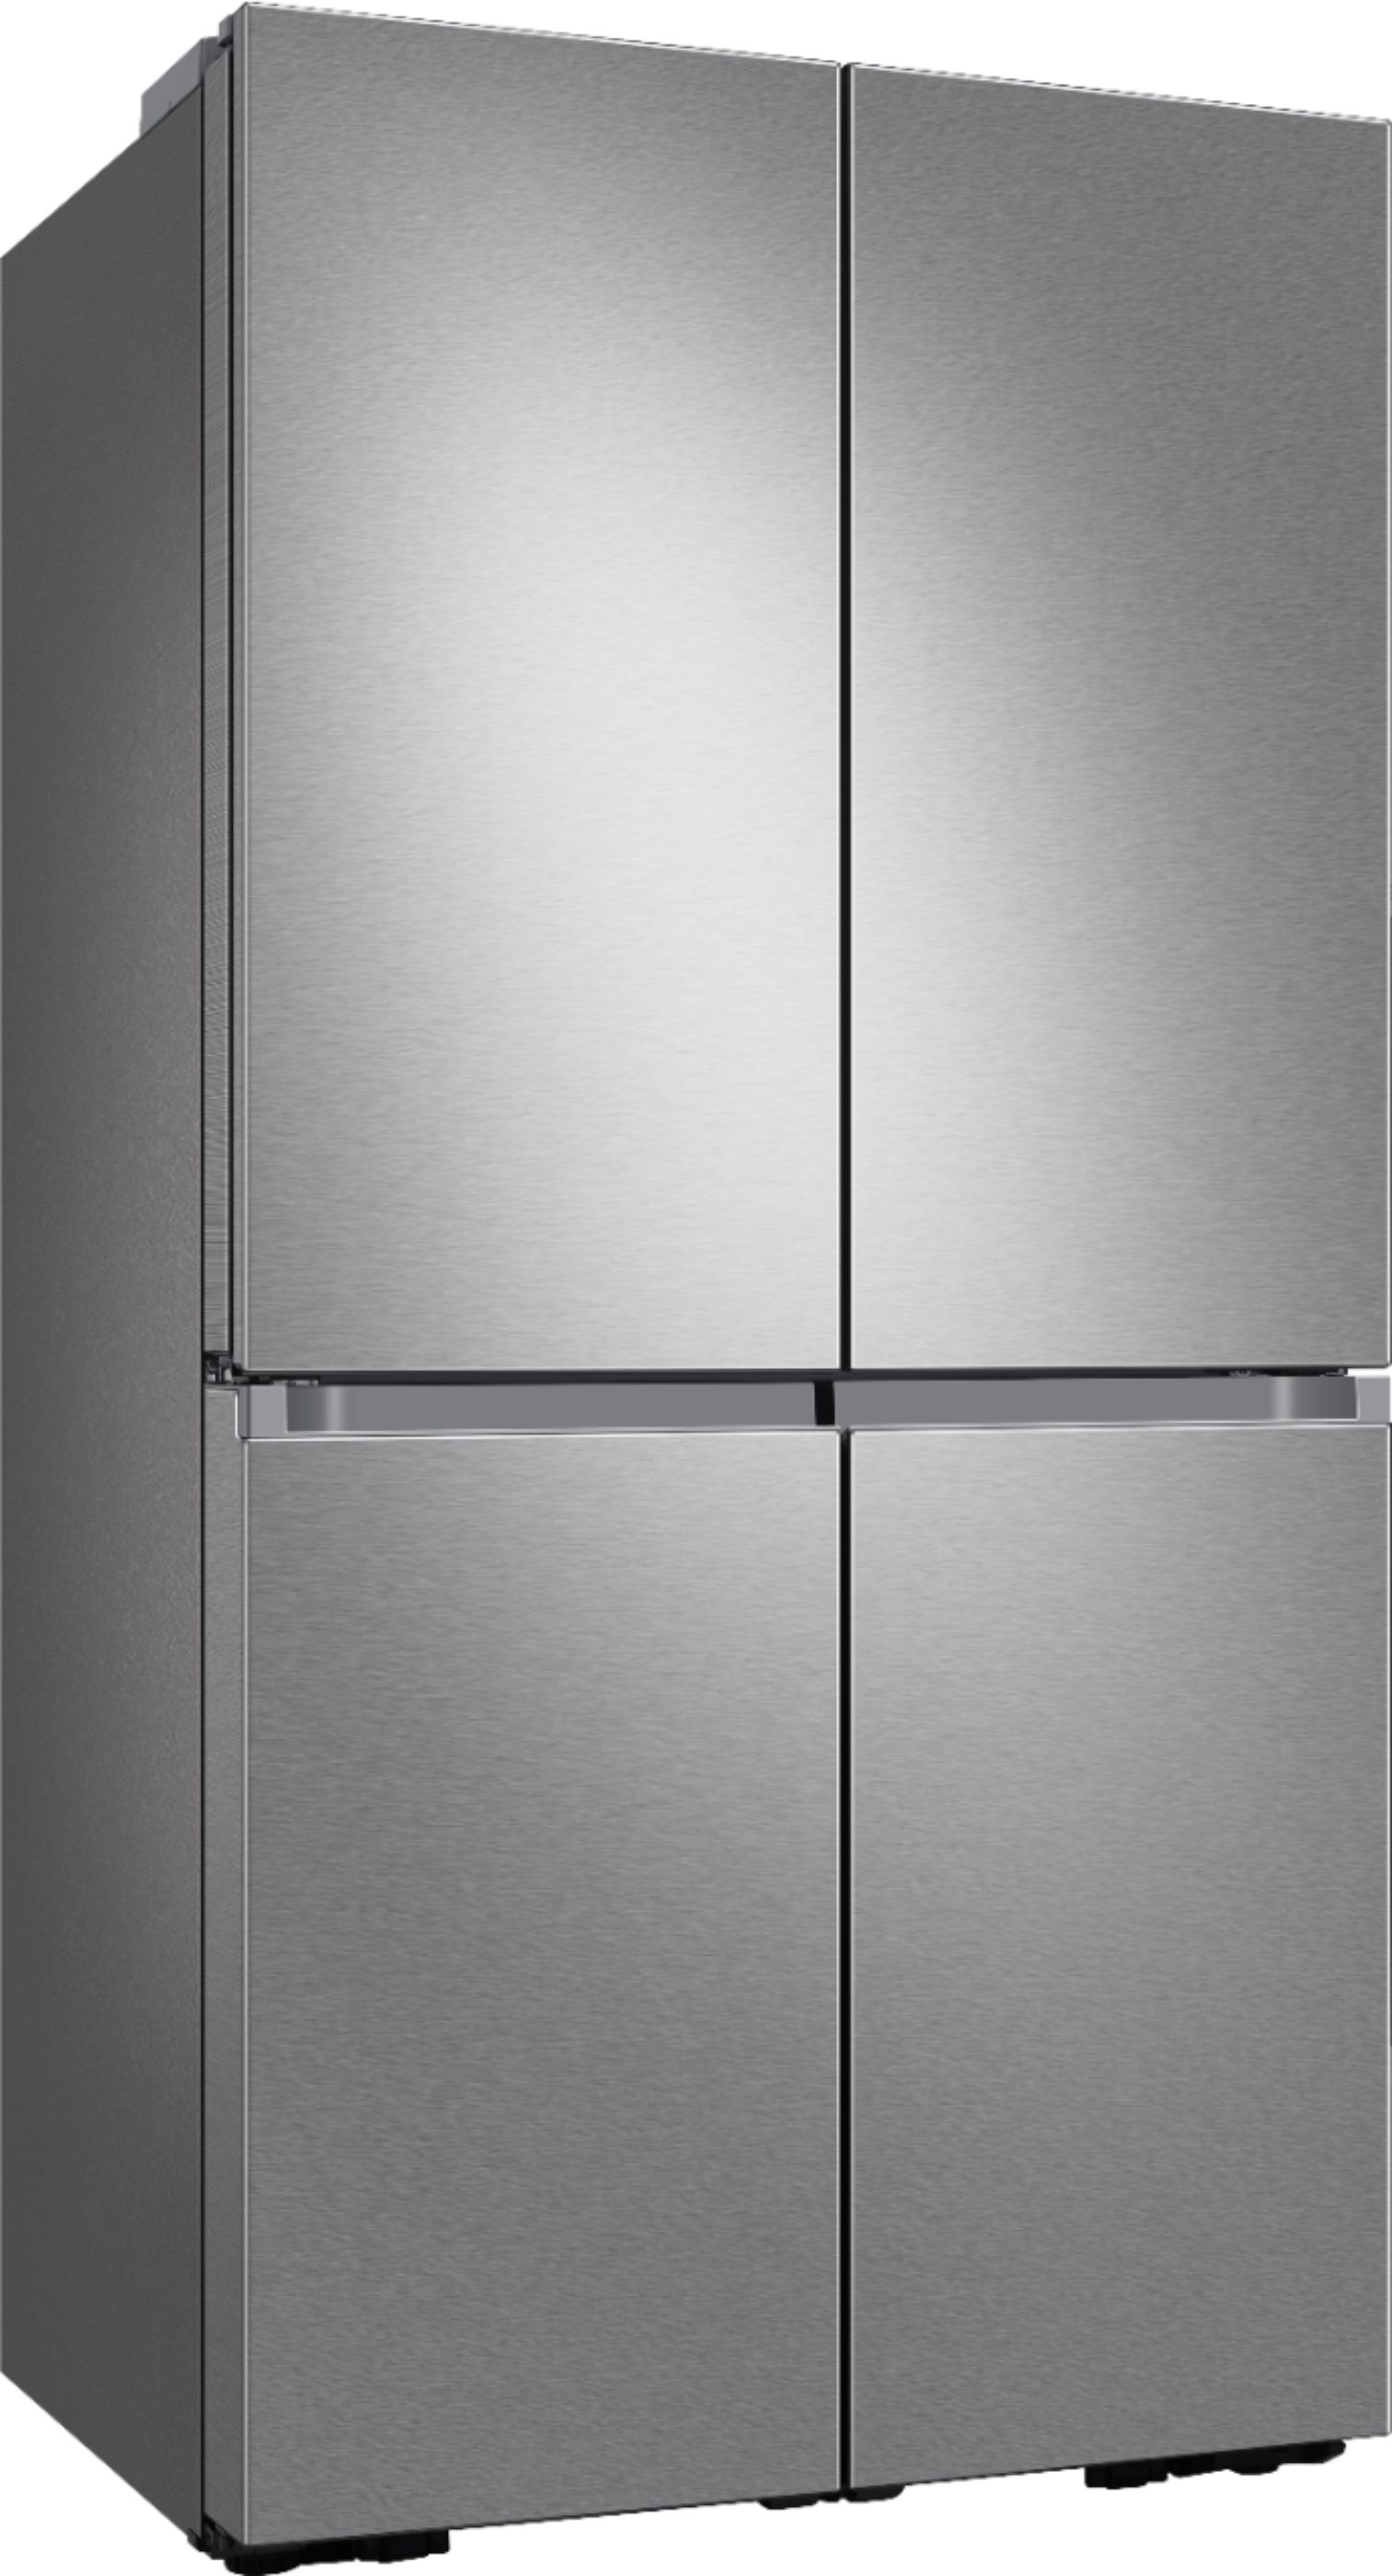 Left View: Samsung - Bespoke 23 cu. ft. 4-Door Flex French Door Counter Depth Refrigerator with WiFi and Customizable Panel Colors - White